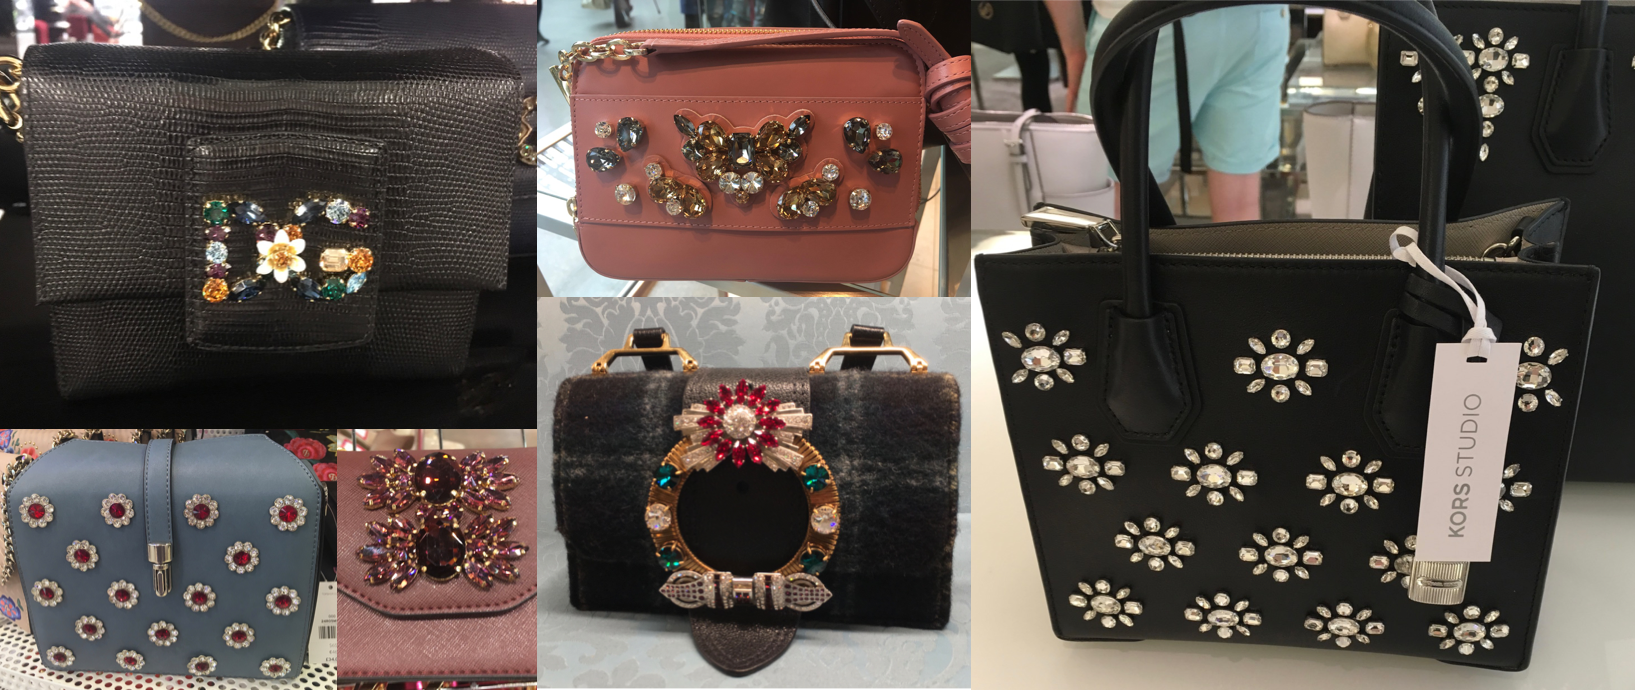 jewelled bags